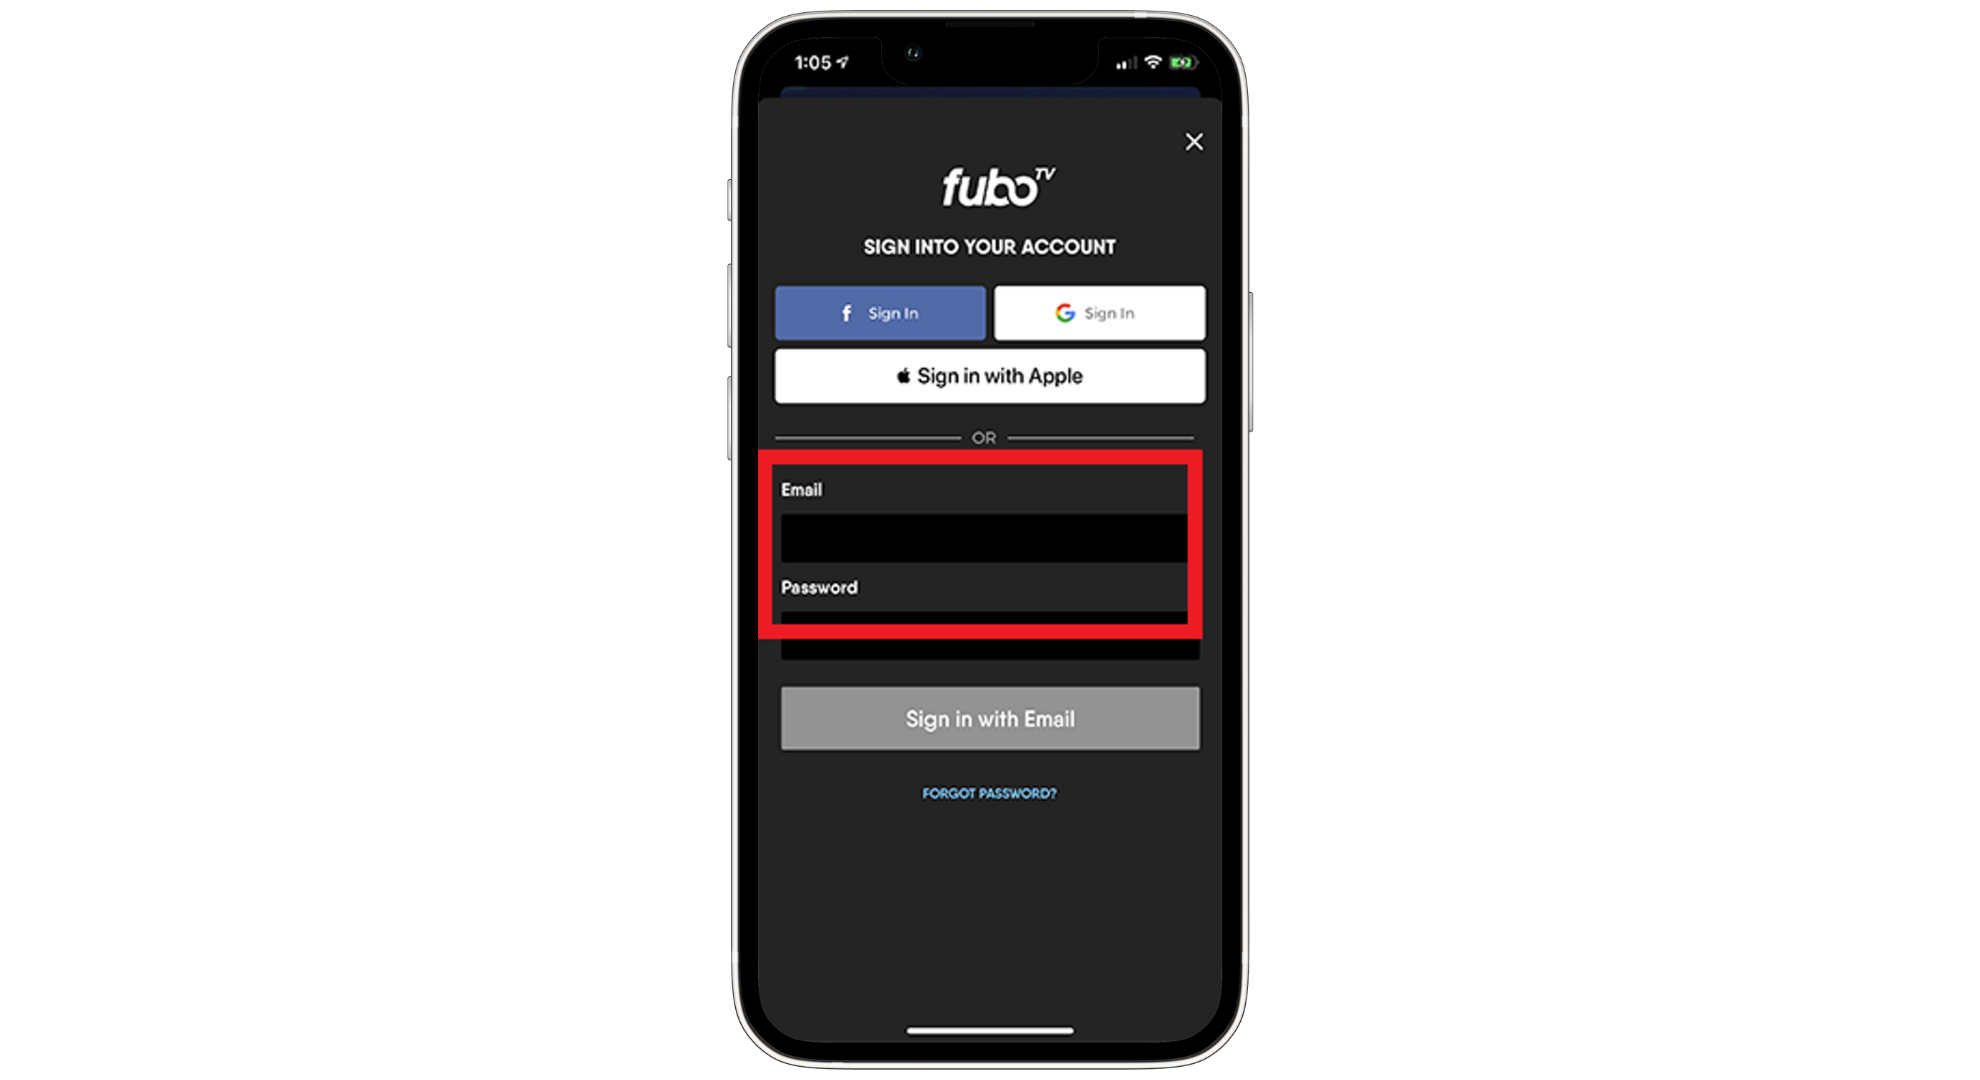 Sign into the Fubo app